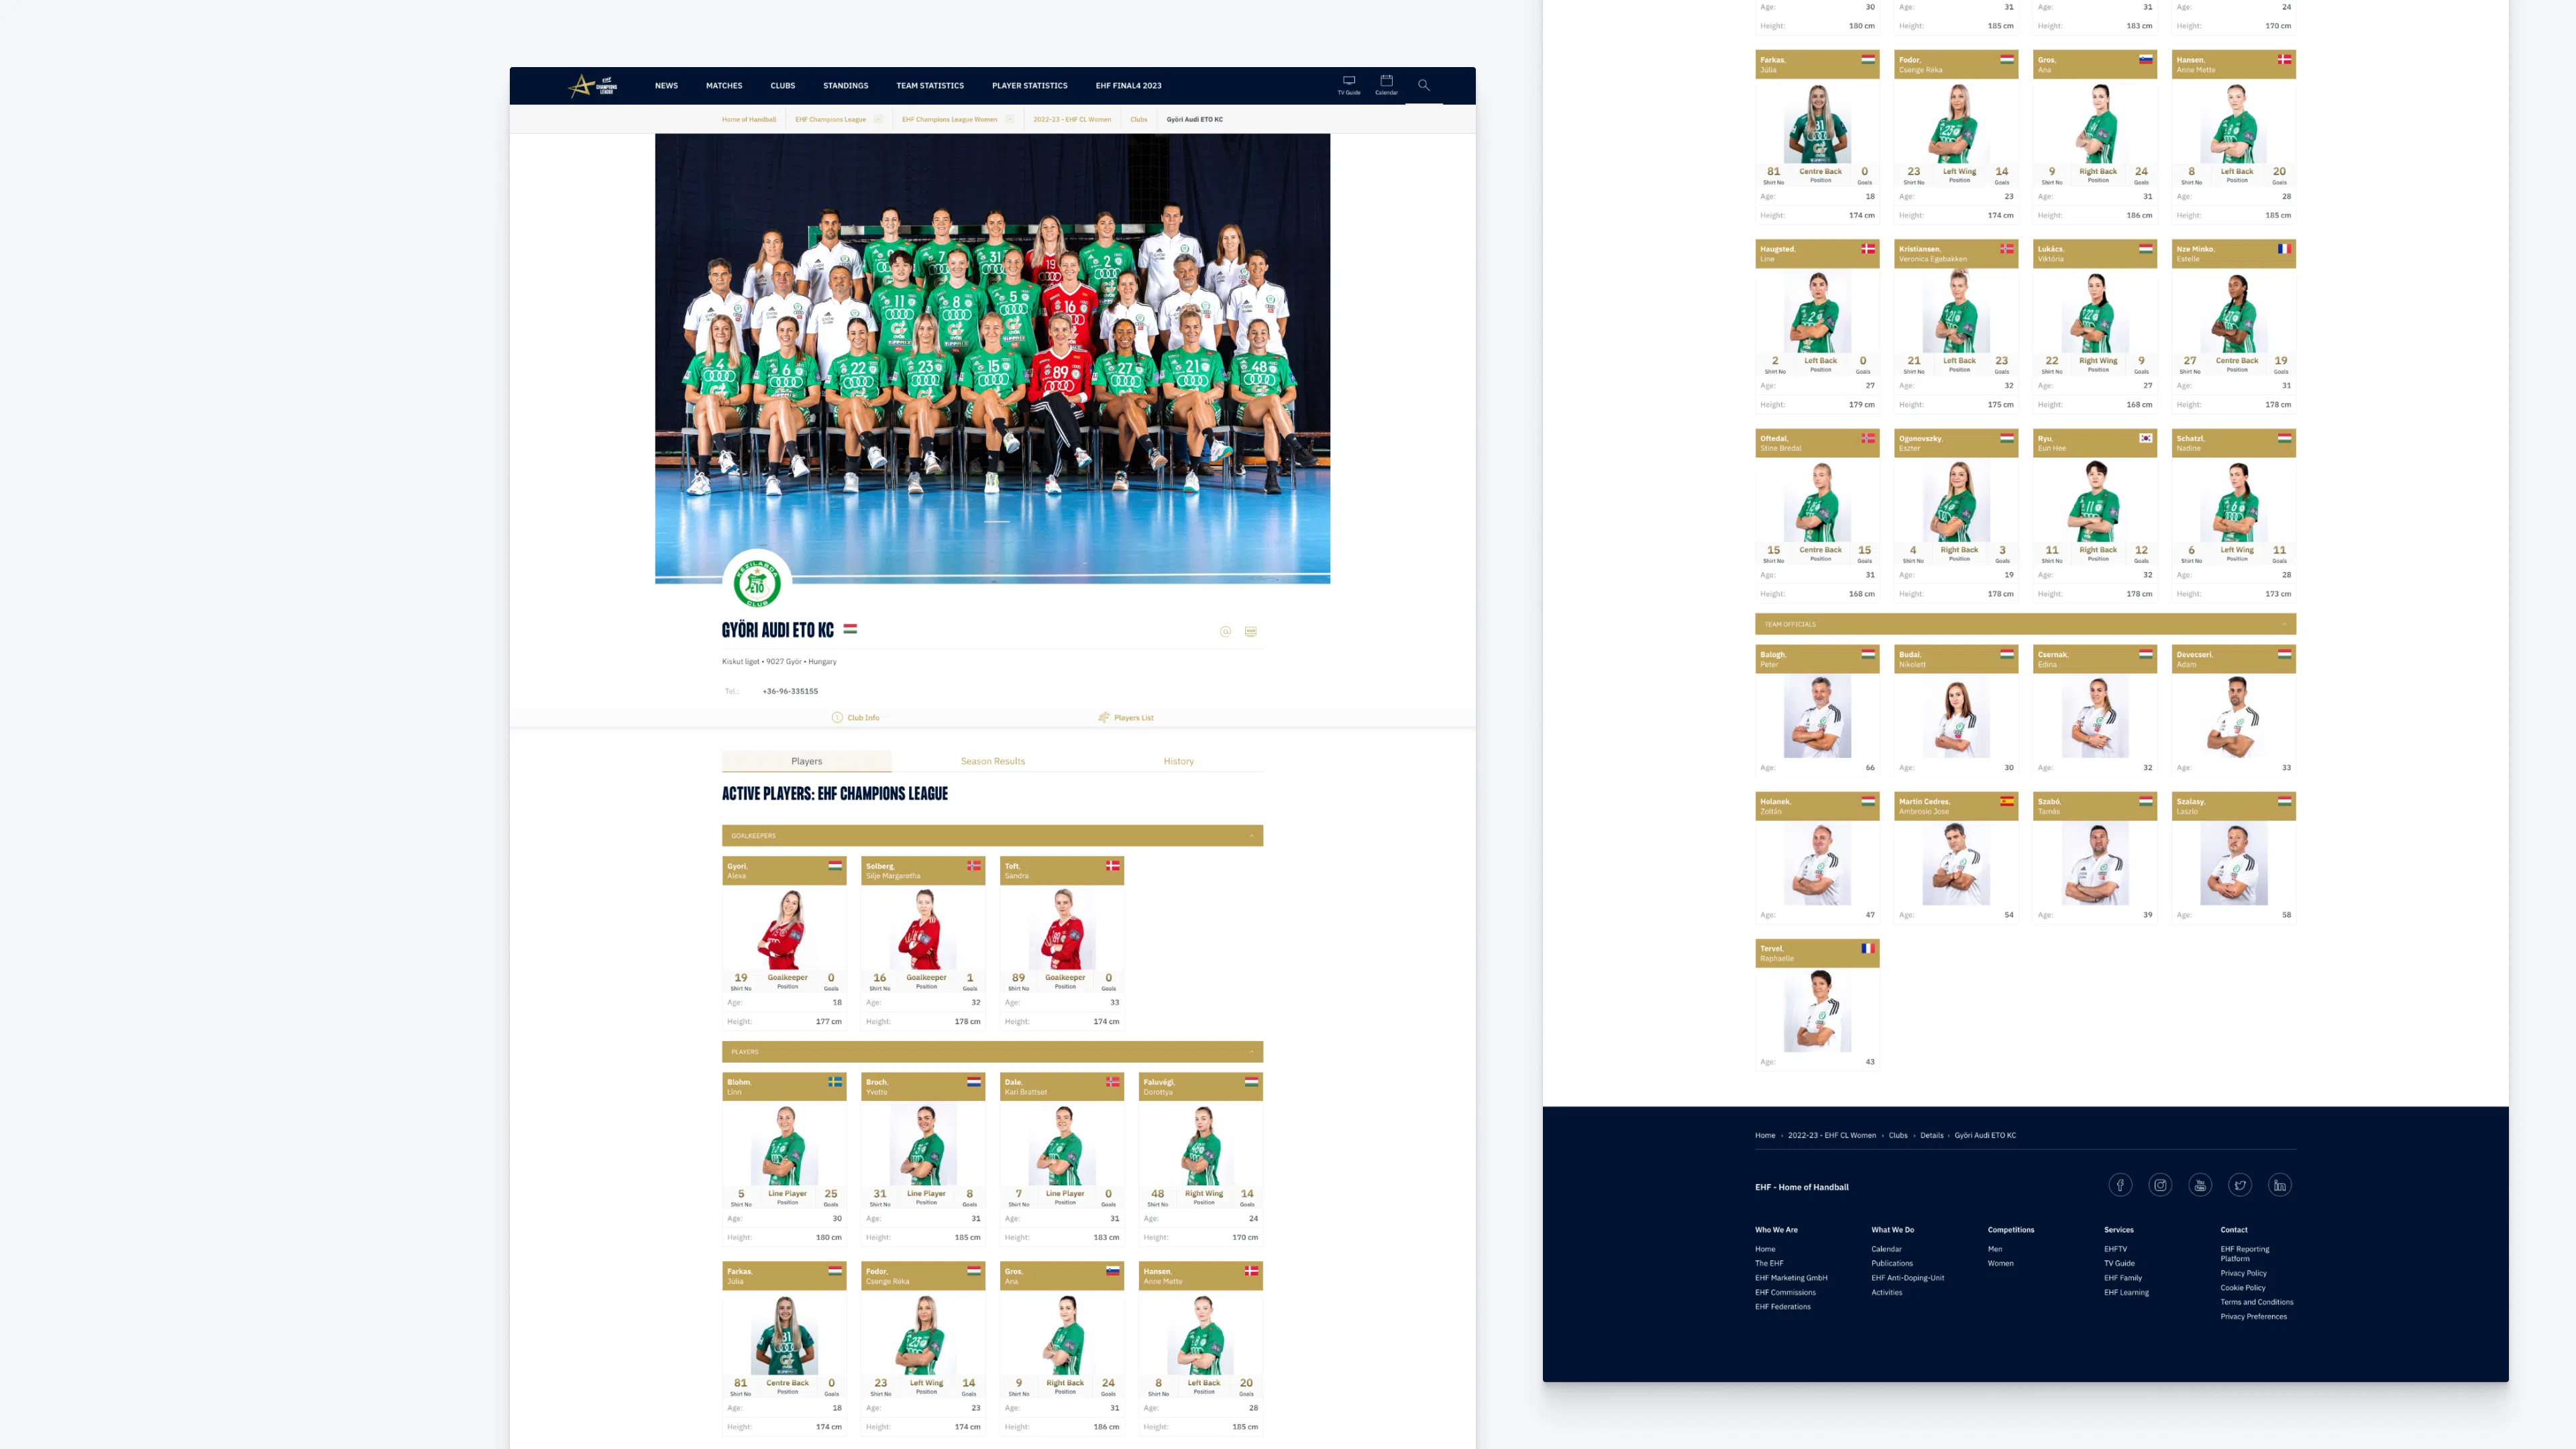 EHF Team Overview Page including Player Details